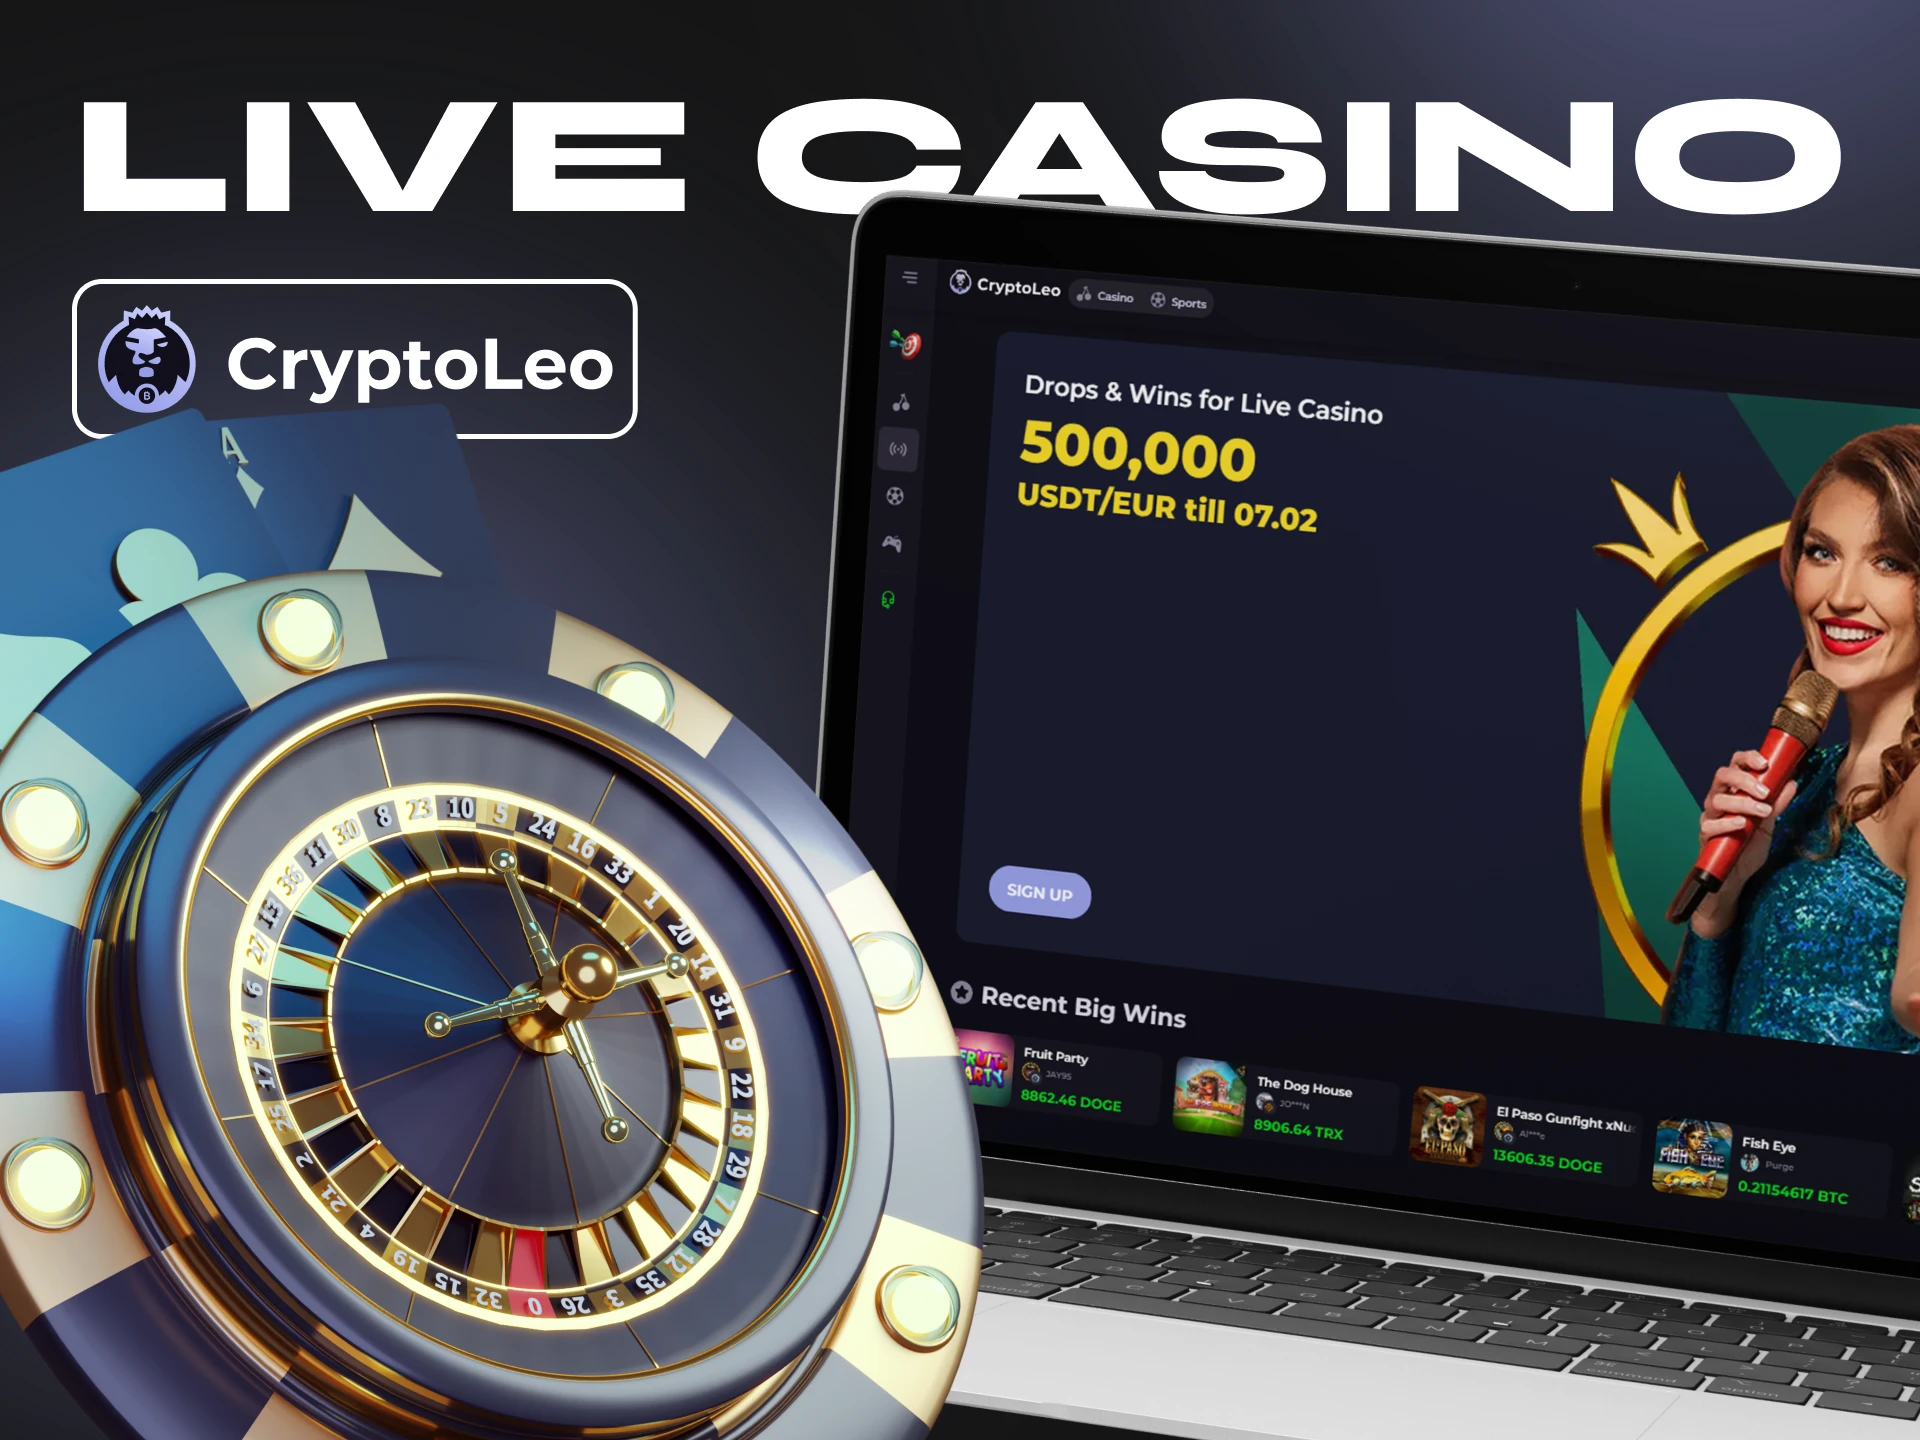 Try playing live casino games on Cryptoleo.